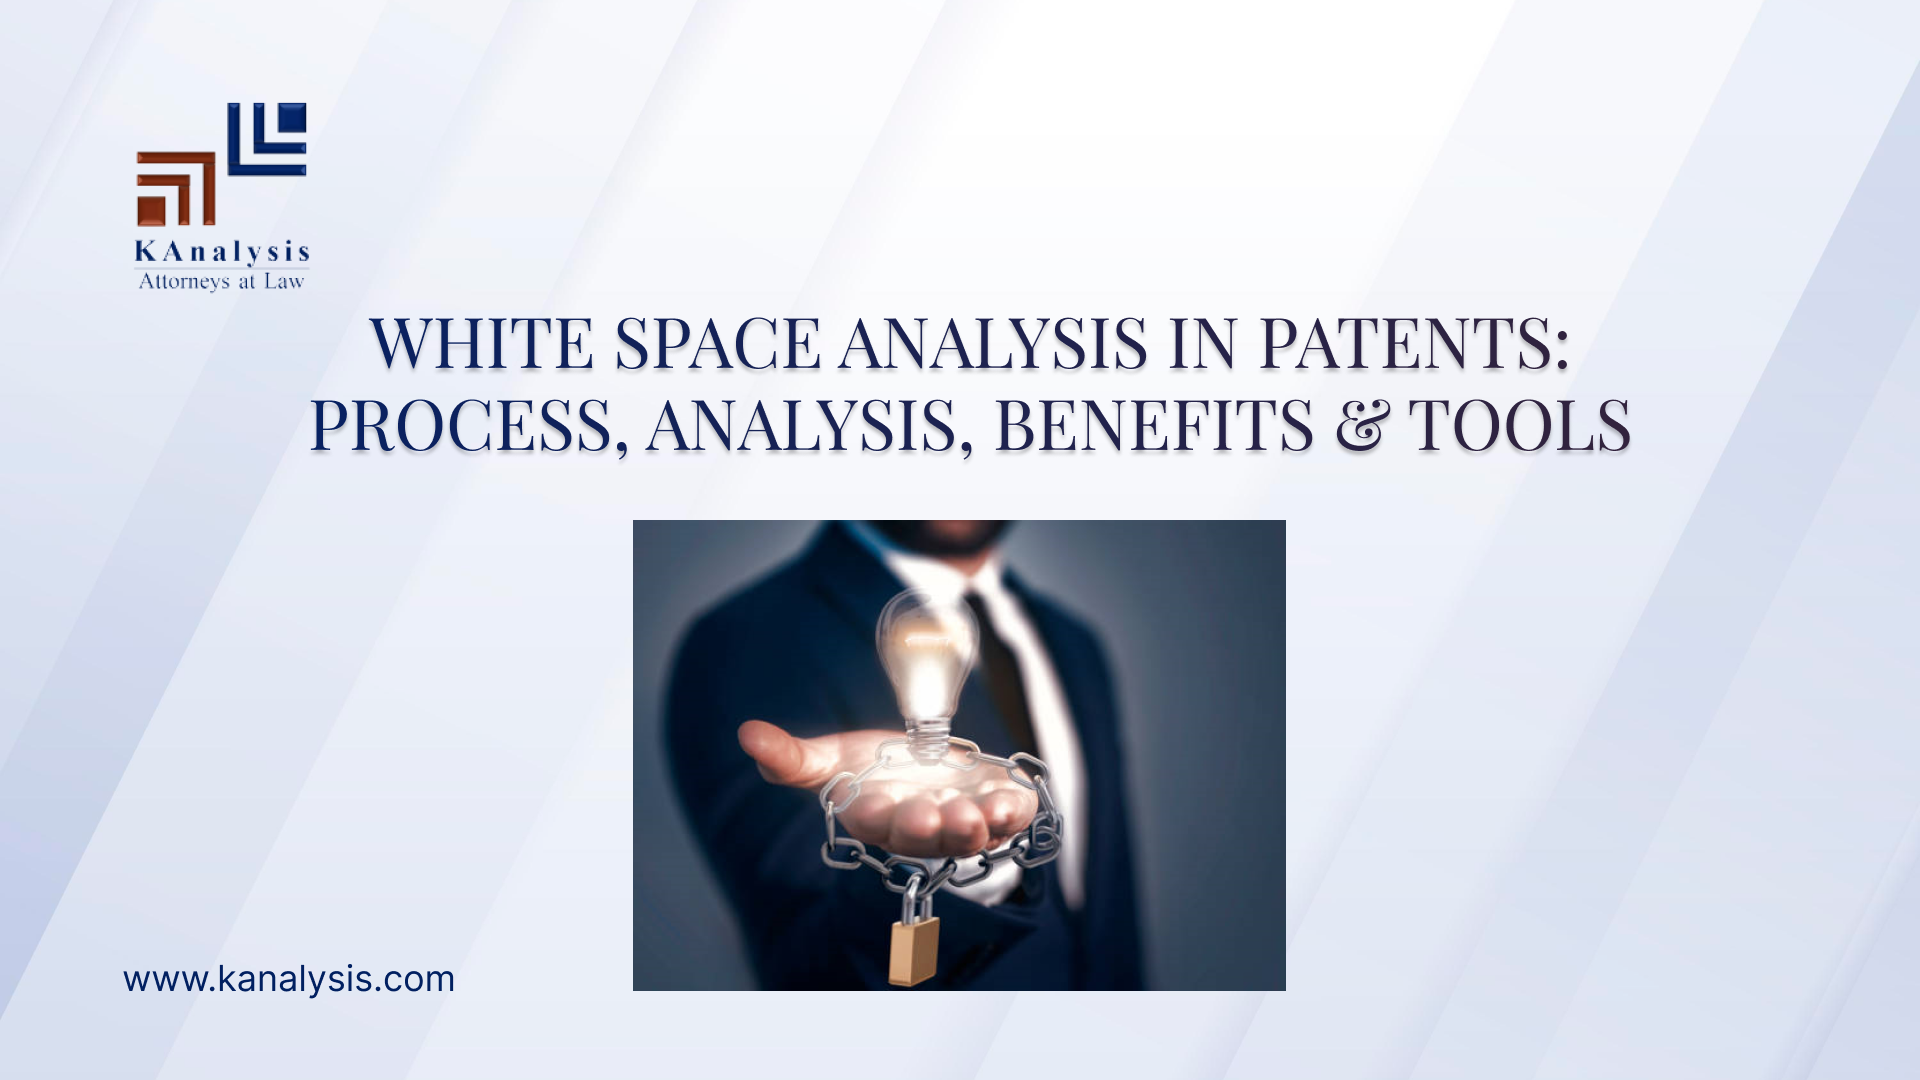 You are currently viewing WHITE SPACE ANALYSIS IN PATENTS: PROCESS, ANALYSIS, BENEFITS AND TOOLS